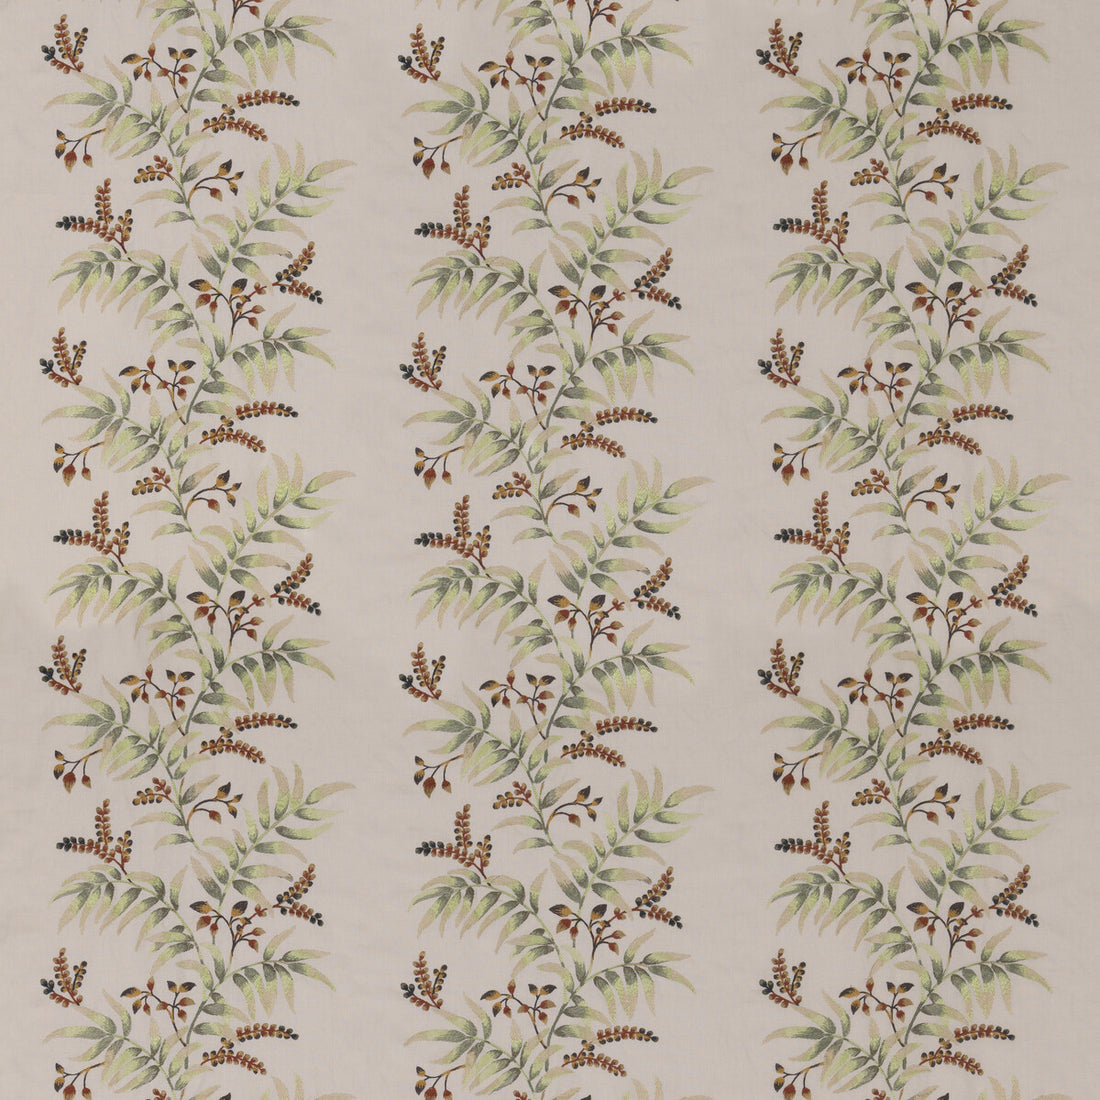 Foxhill fabric in green color - pattern BF11026.1.0 - by G P &amp; J Baker in the Burford collection